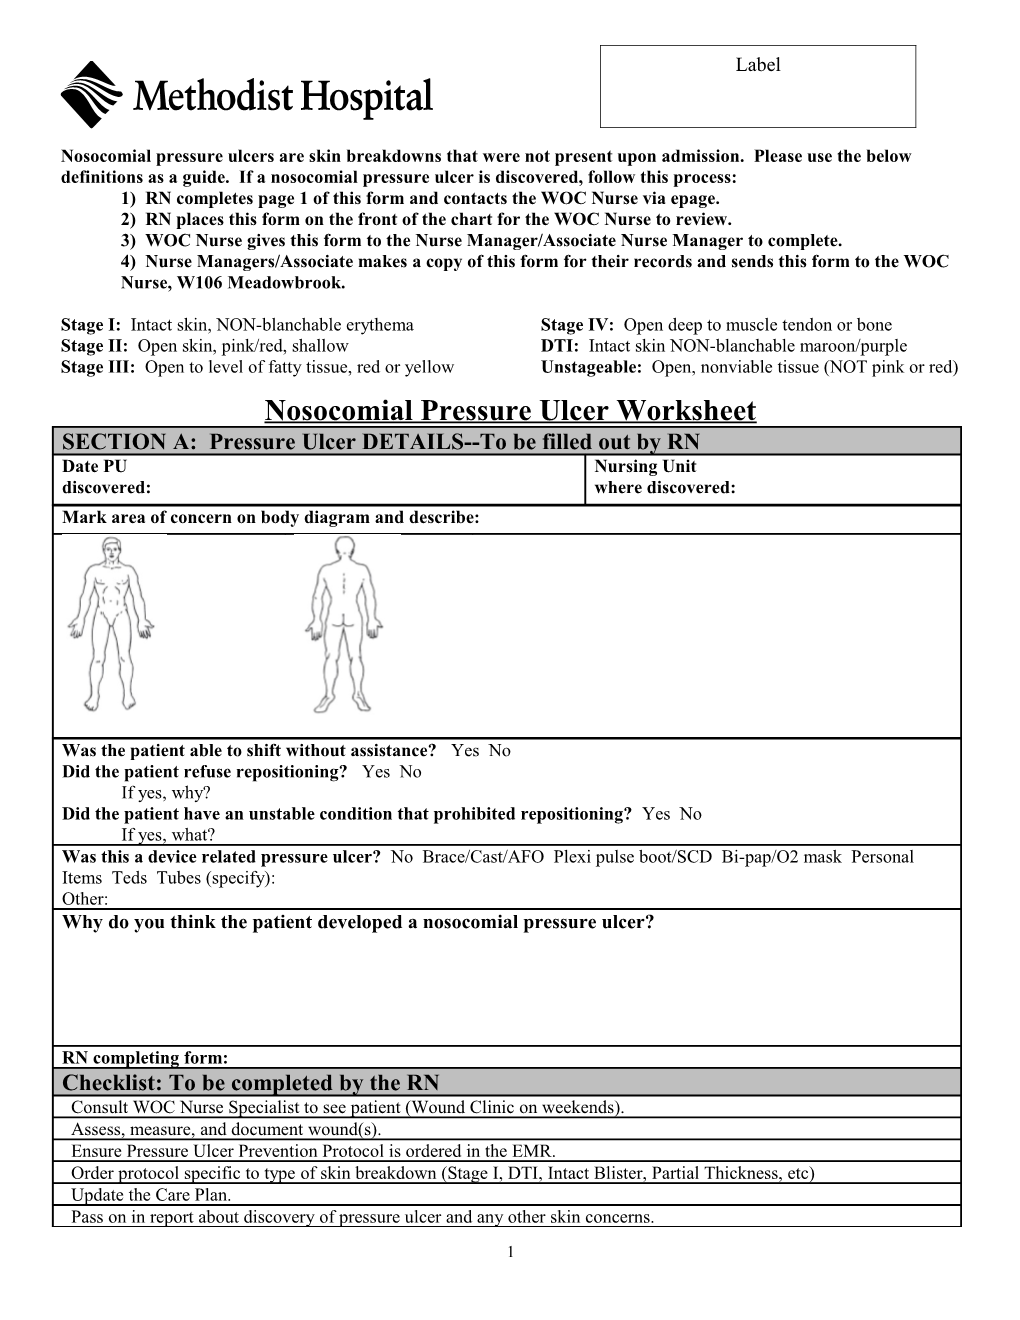 1) RN Completes Page 1 of This Form and Contacts the WOC Nurse Via Epage